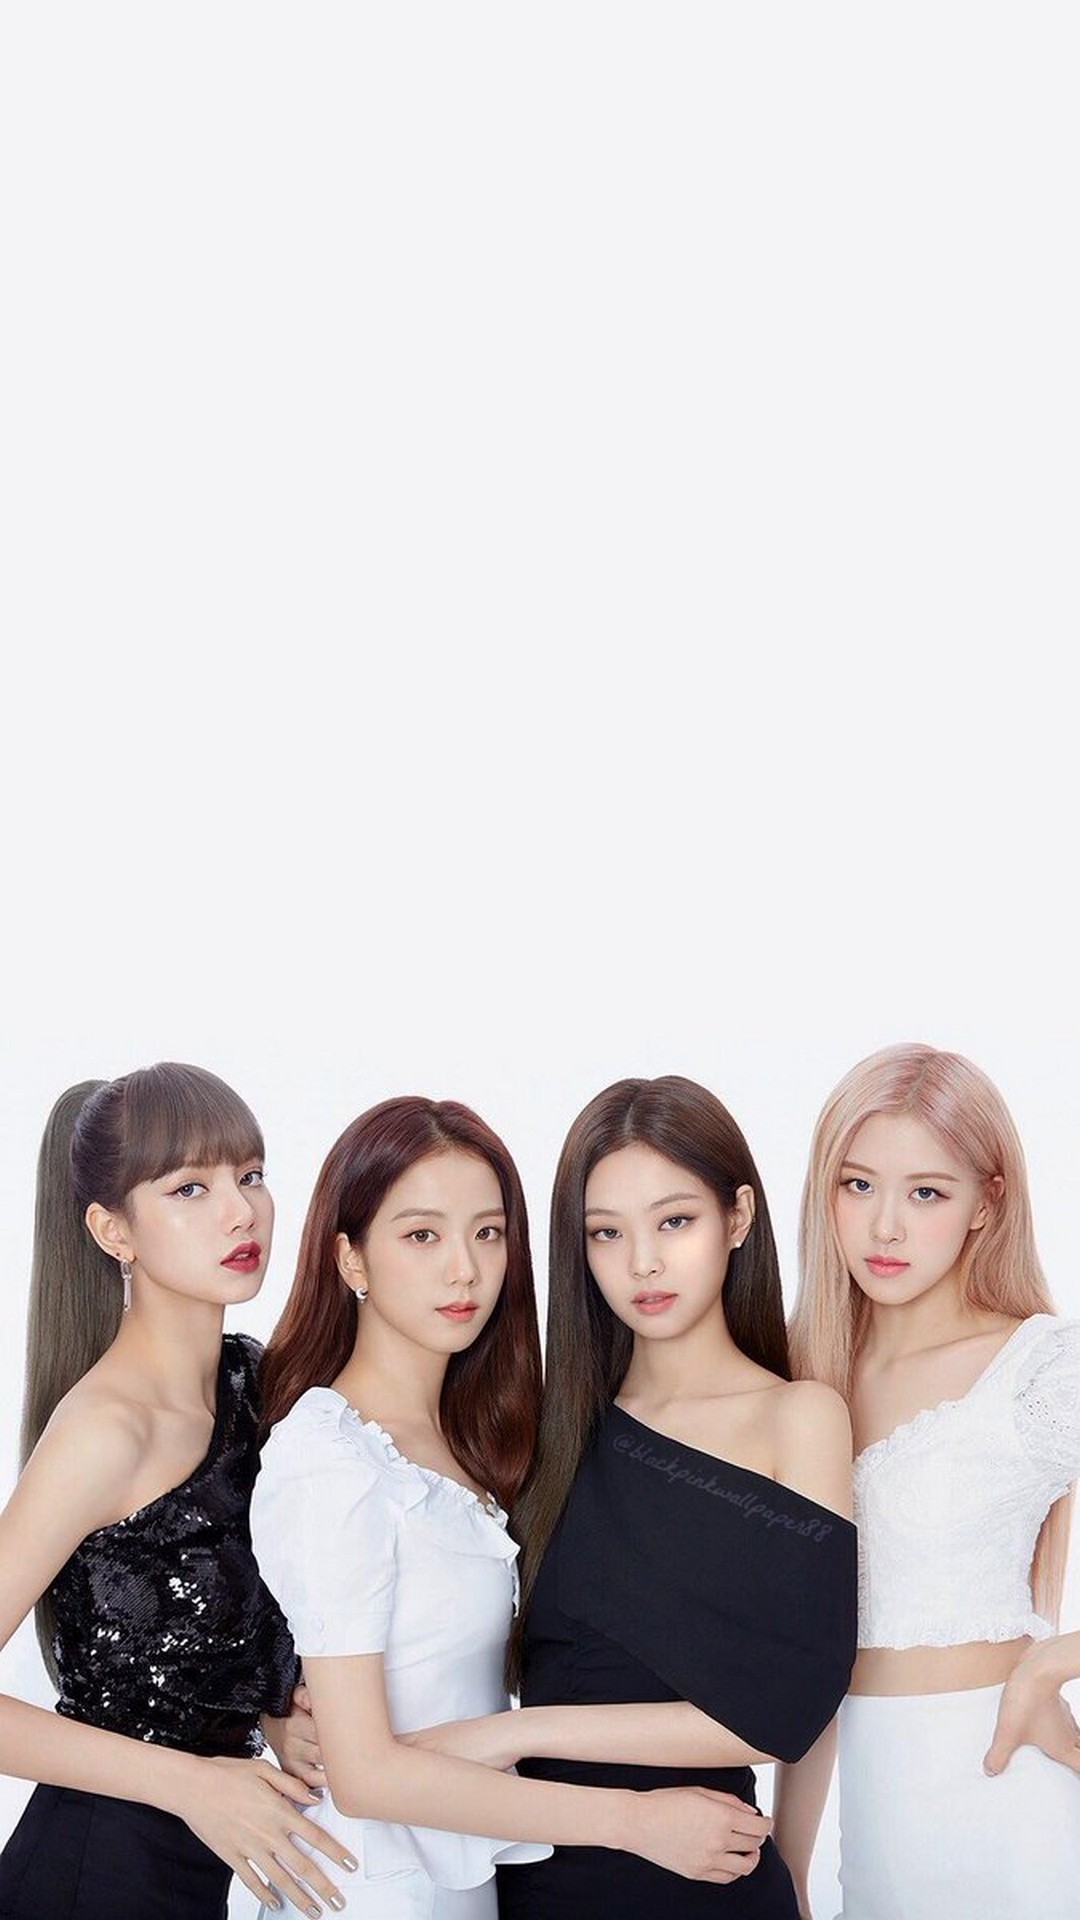 Blackpink Wallpaper High Quality - Filter by device filter by ...